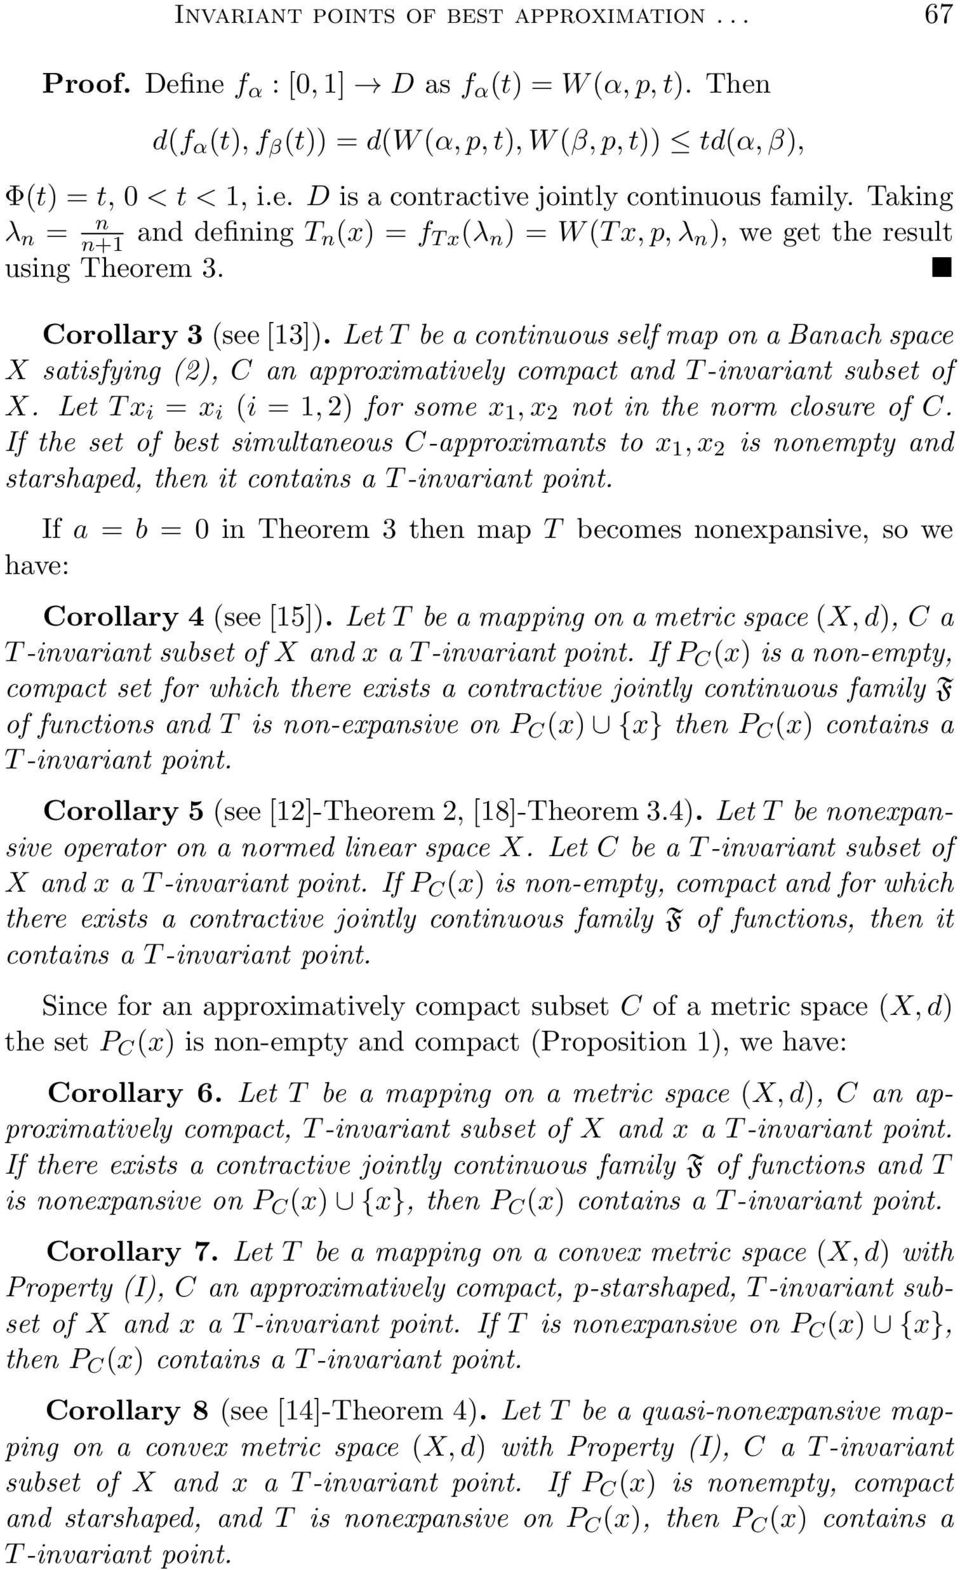 Let T be a continuous self map on a Banach space X satisfying (2), C an approximatively compact and T -invariant subset of X. Let T x i = x i (i = 1, 2) for some x 1, x 2 not in the norm closure of C.